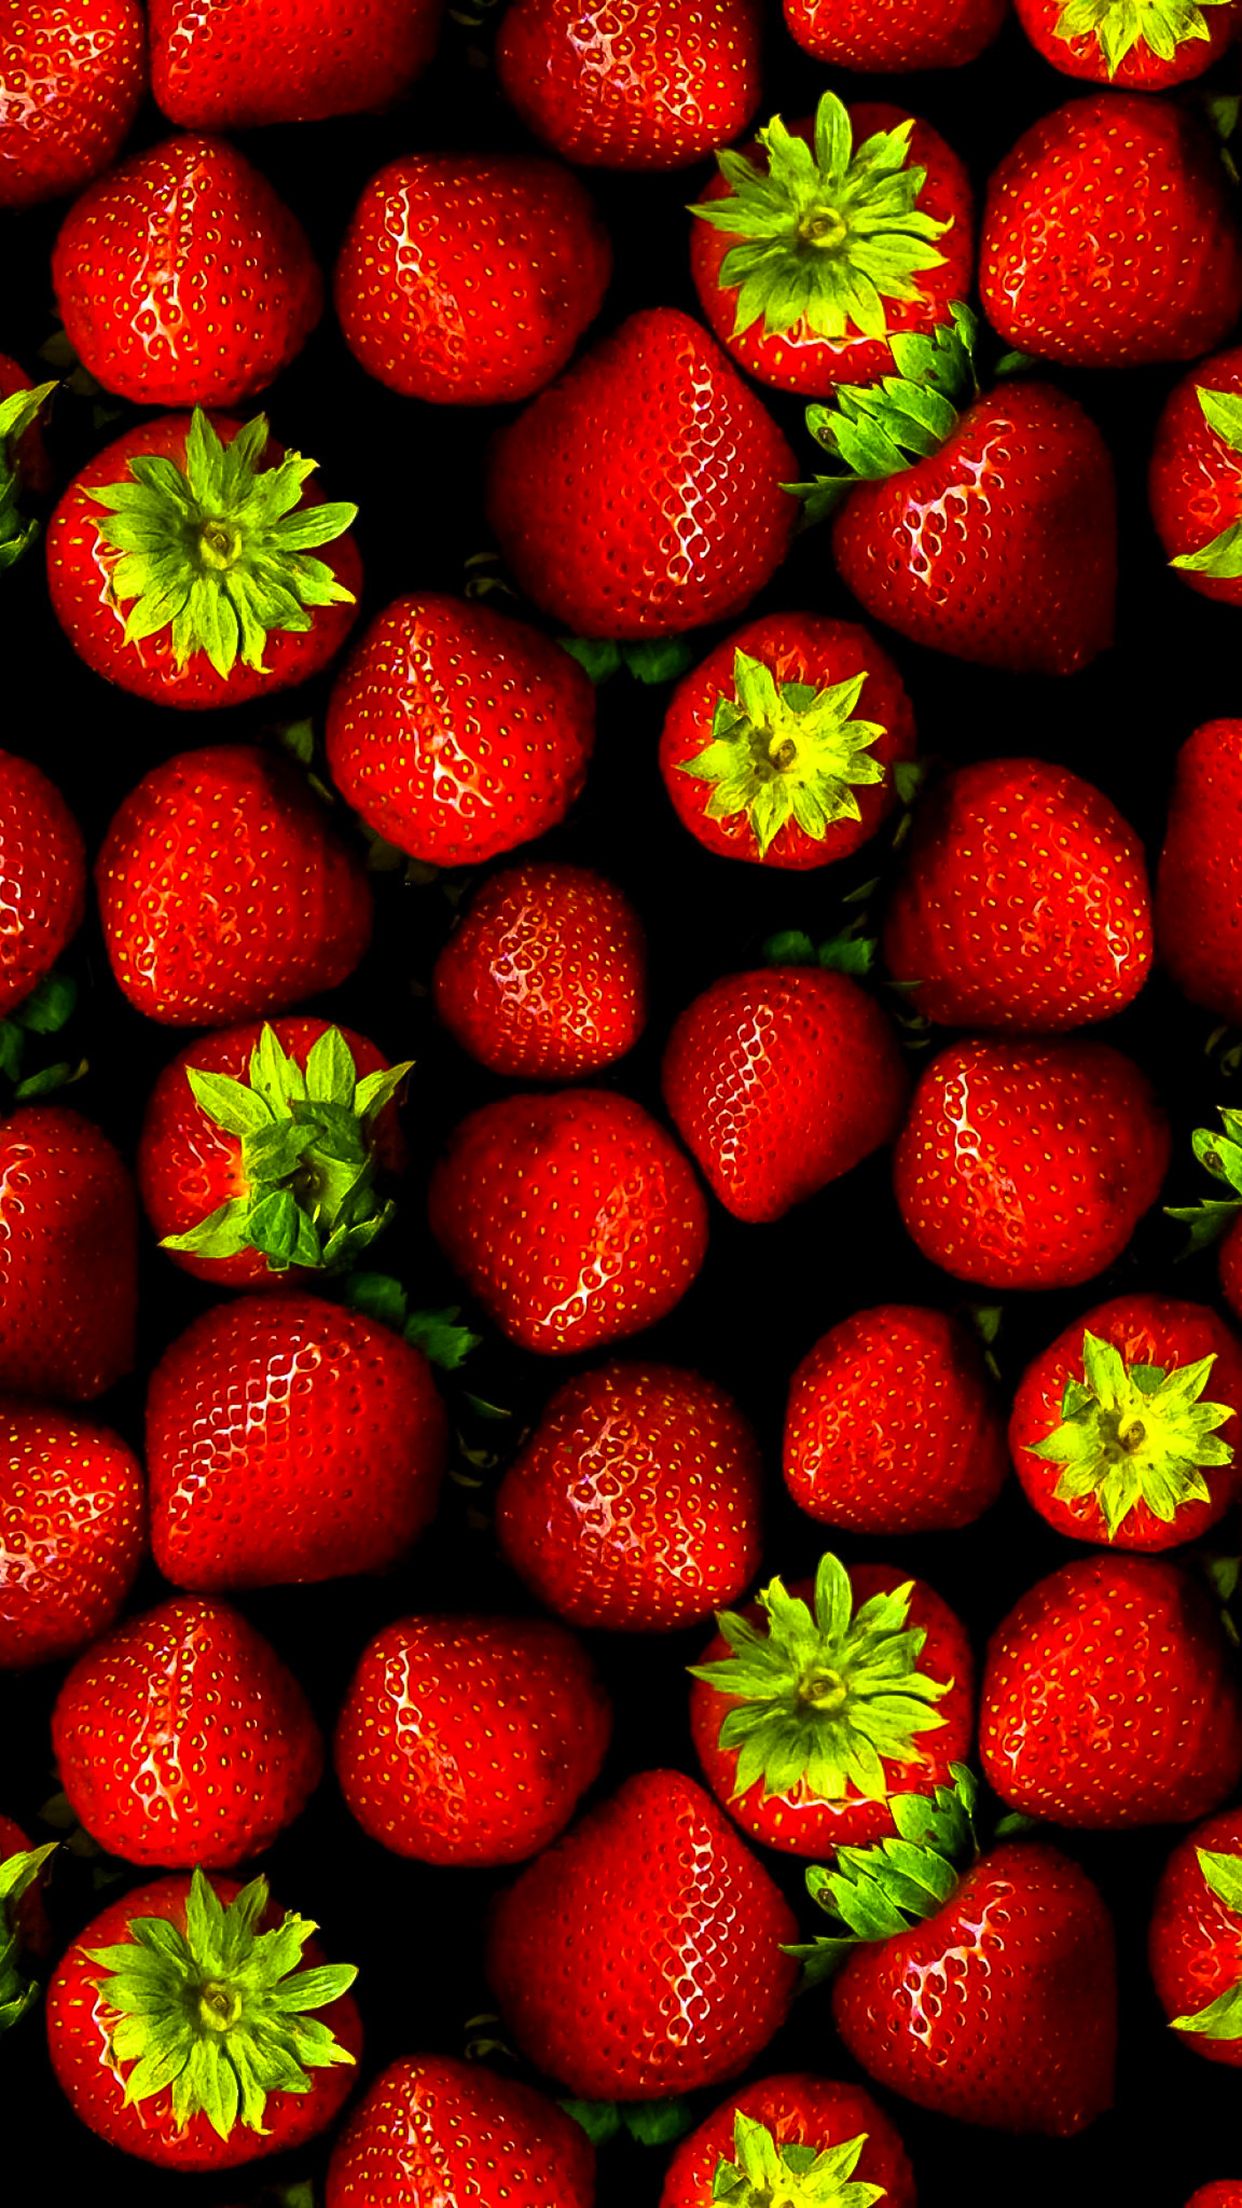 Fresh Strawberries Wallpaper for iPhone Pro Max, X, 6